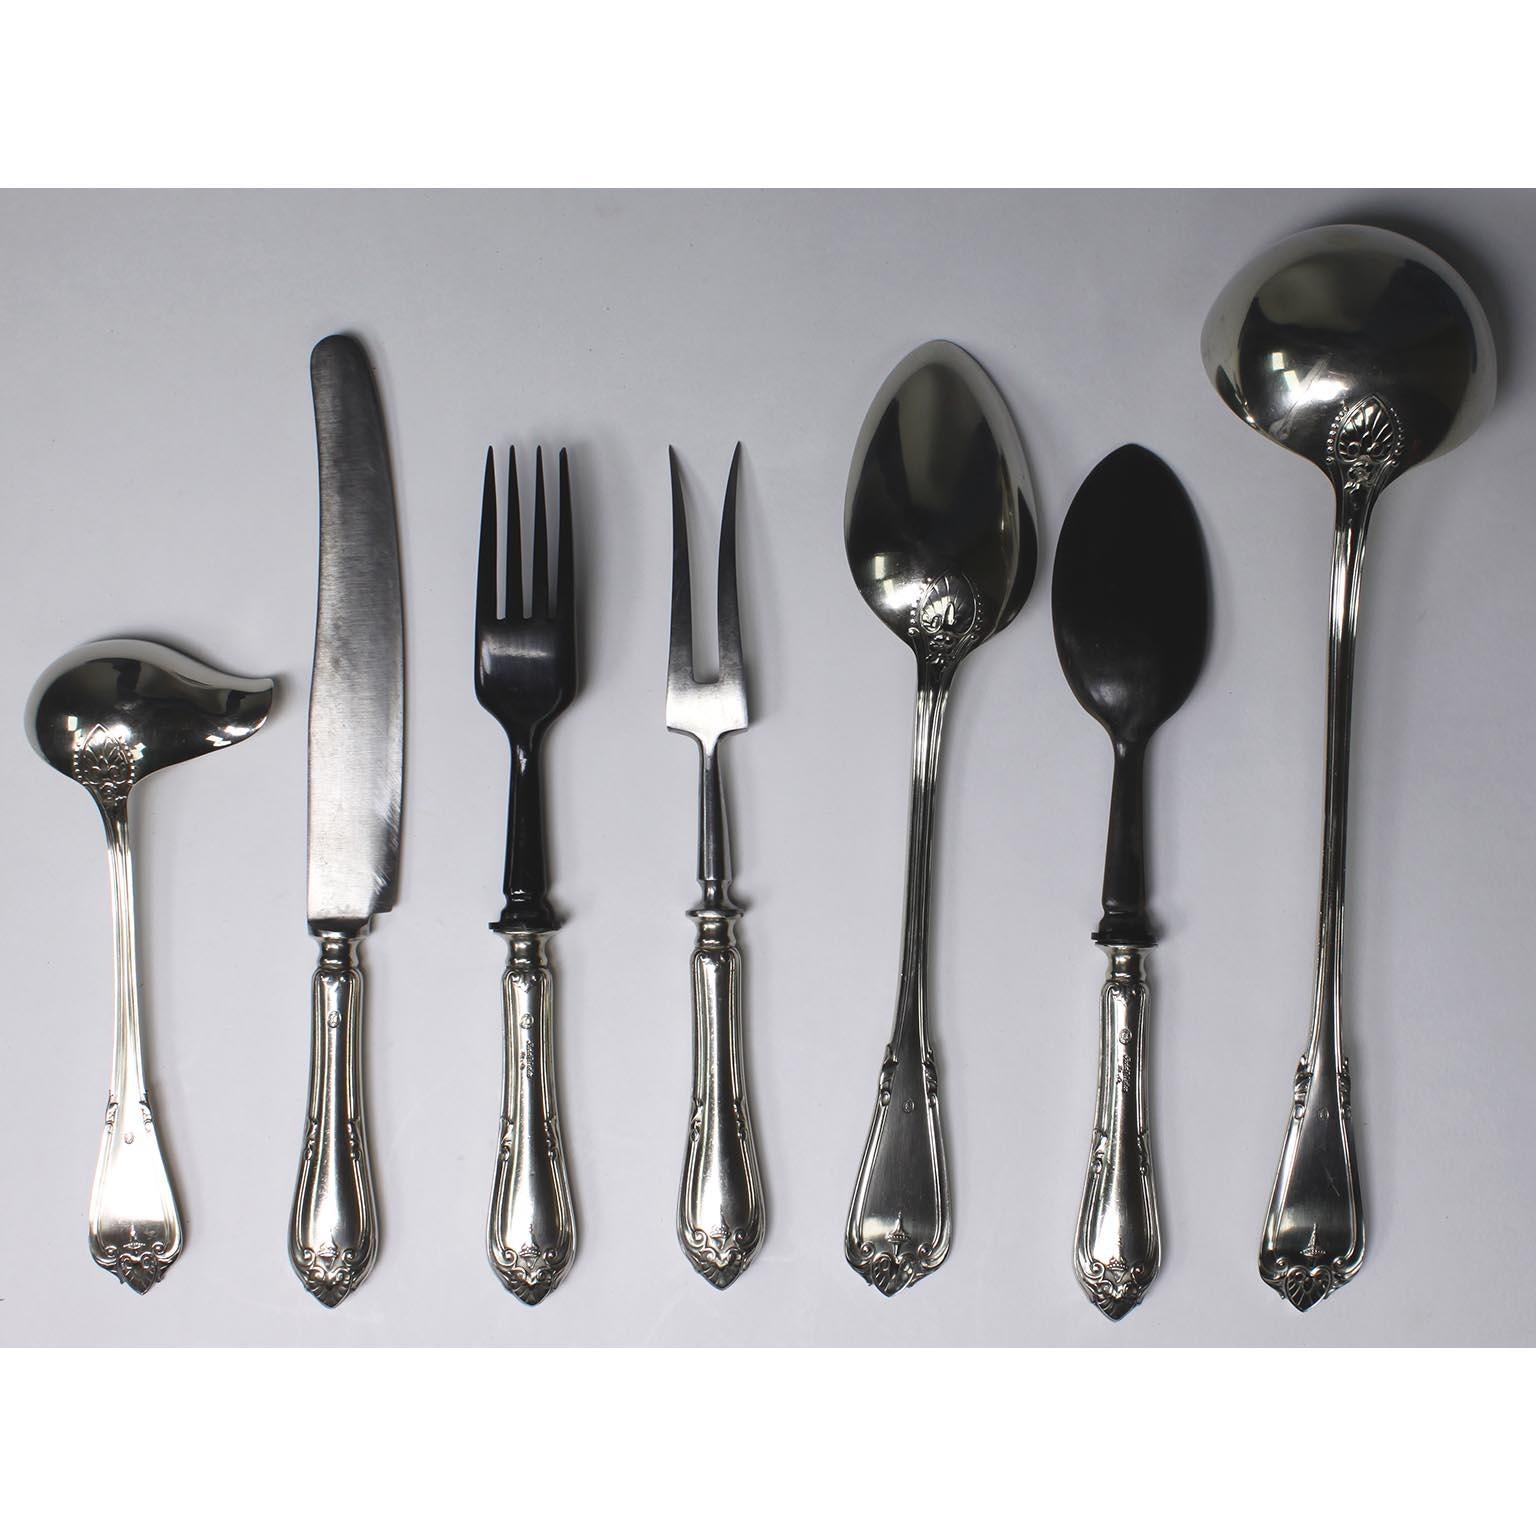 A Fine Early 20th Century 152 Piece Austrian Flatware Set by Berndorf Alpacca For Sale 3